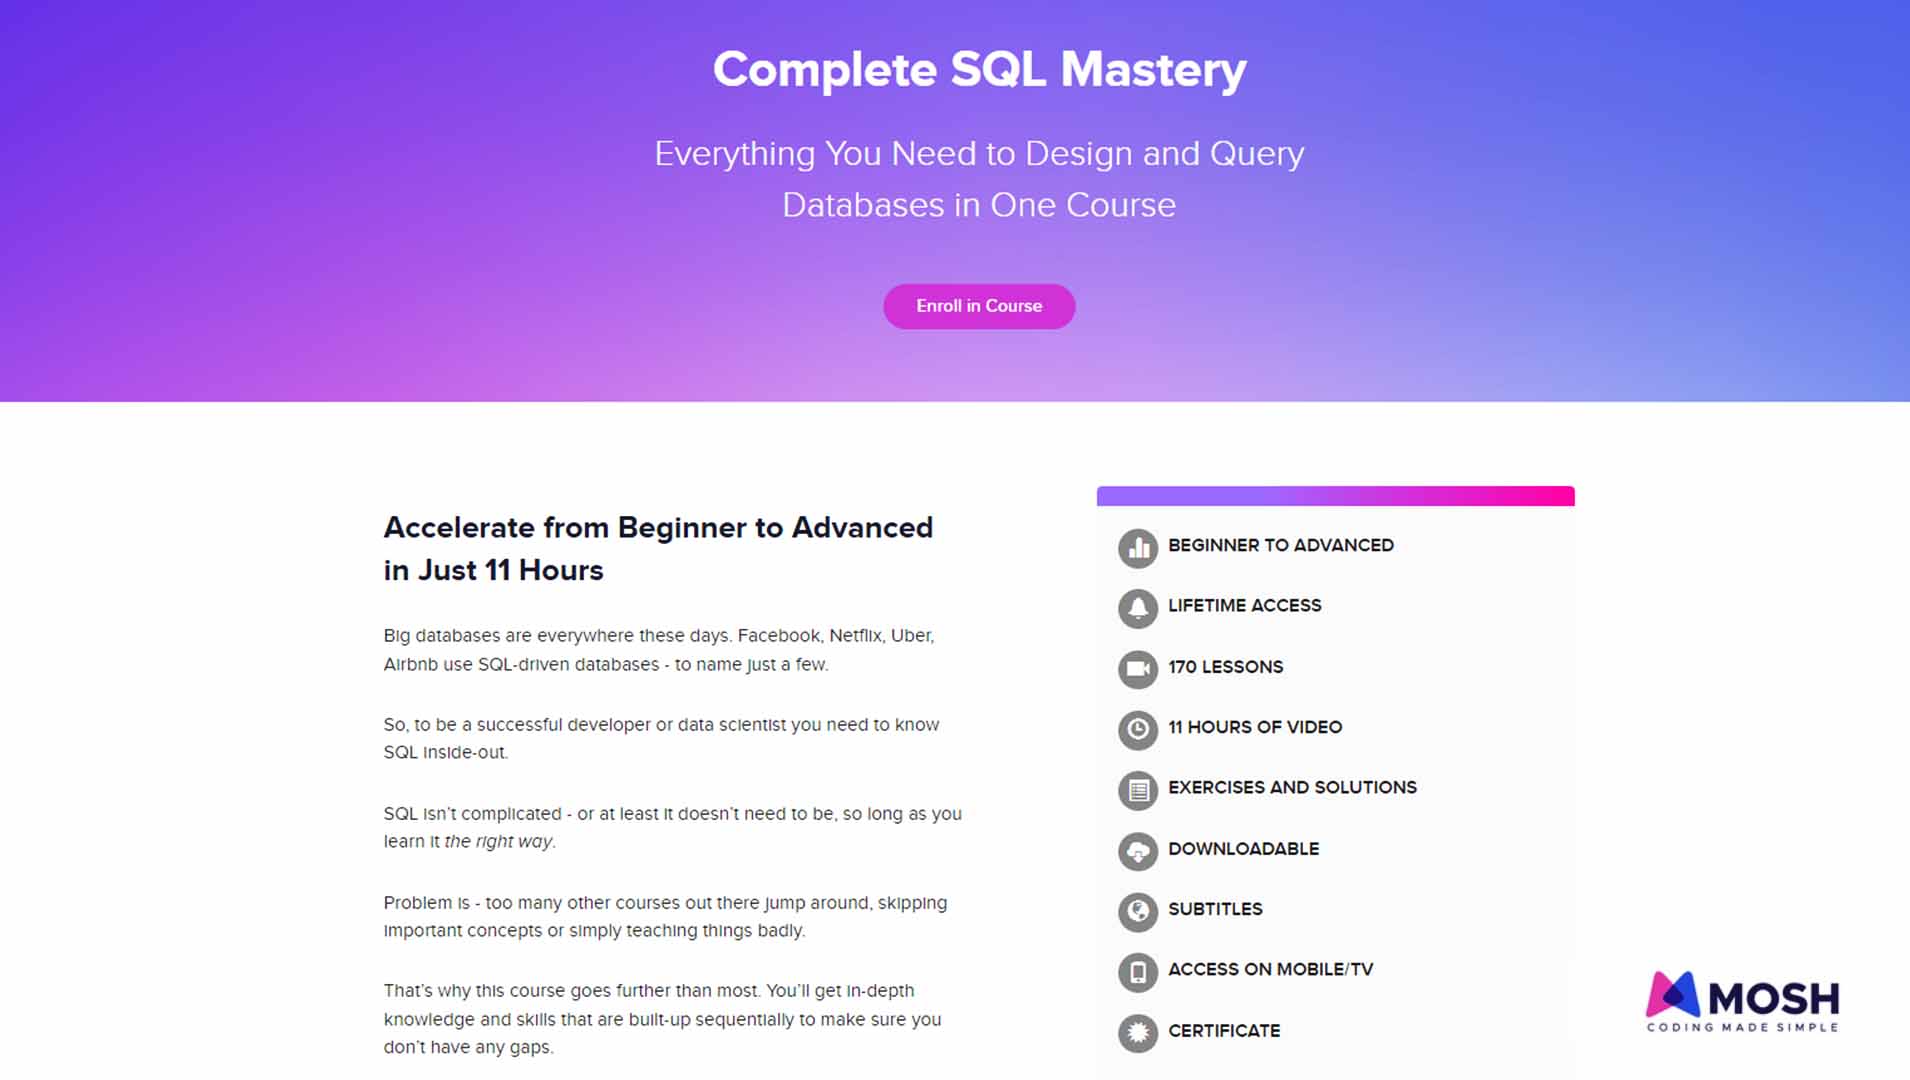 Complete SQL Mastery